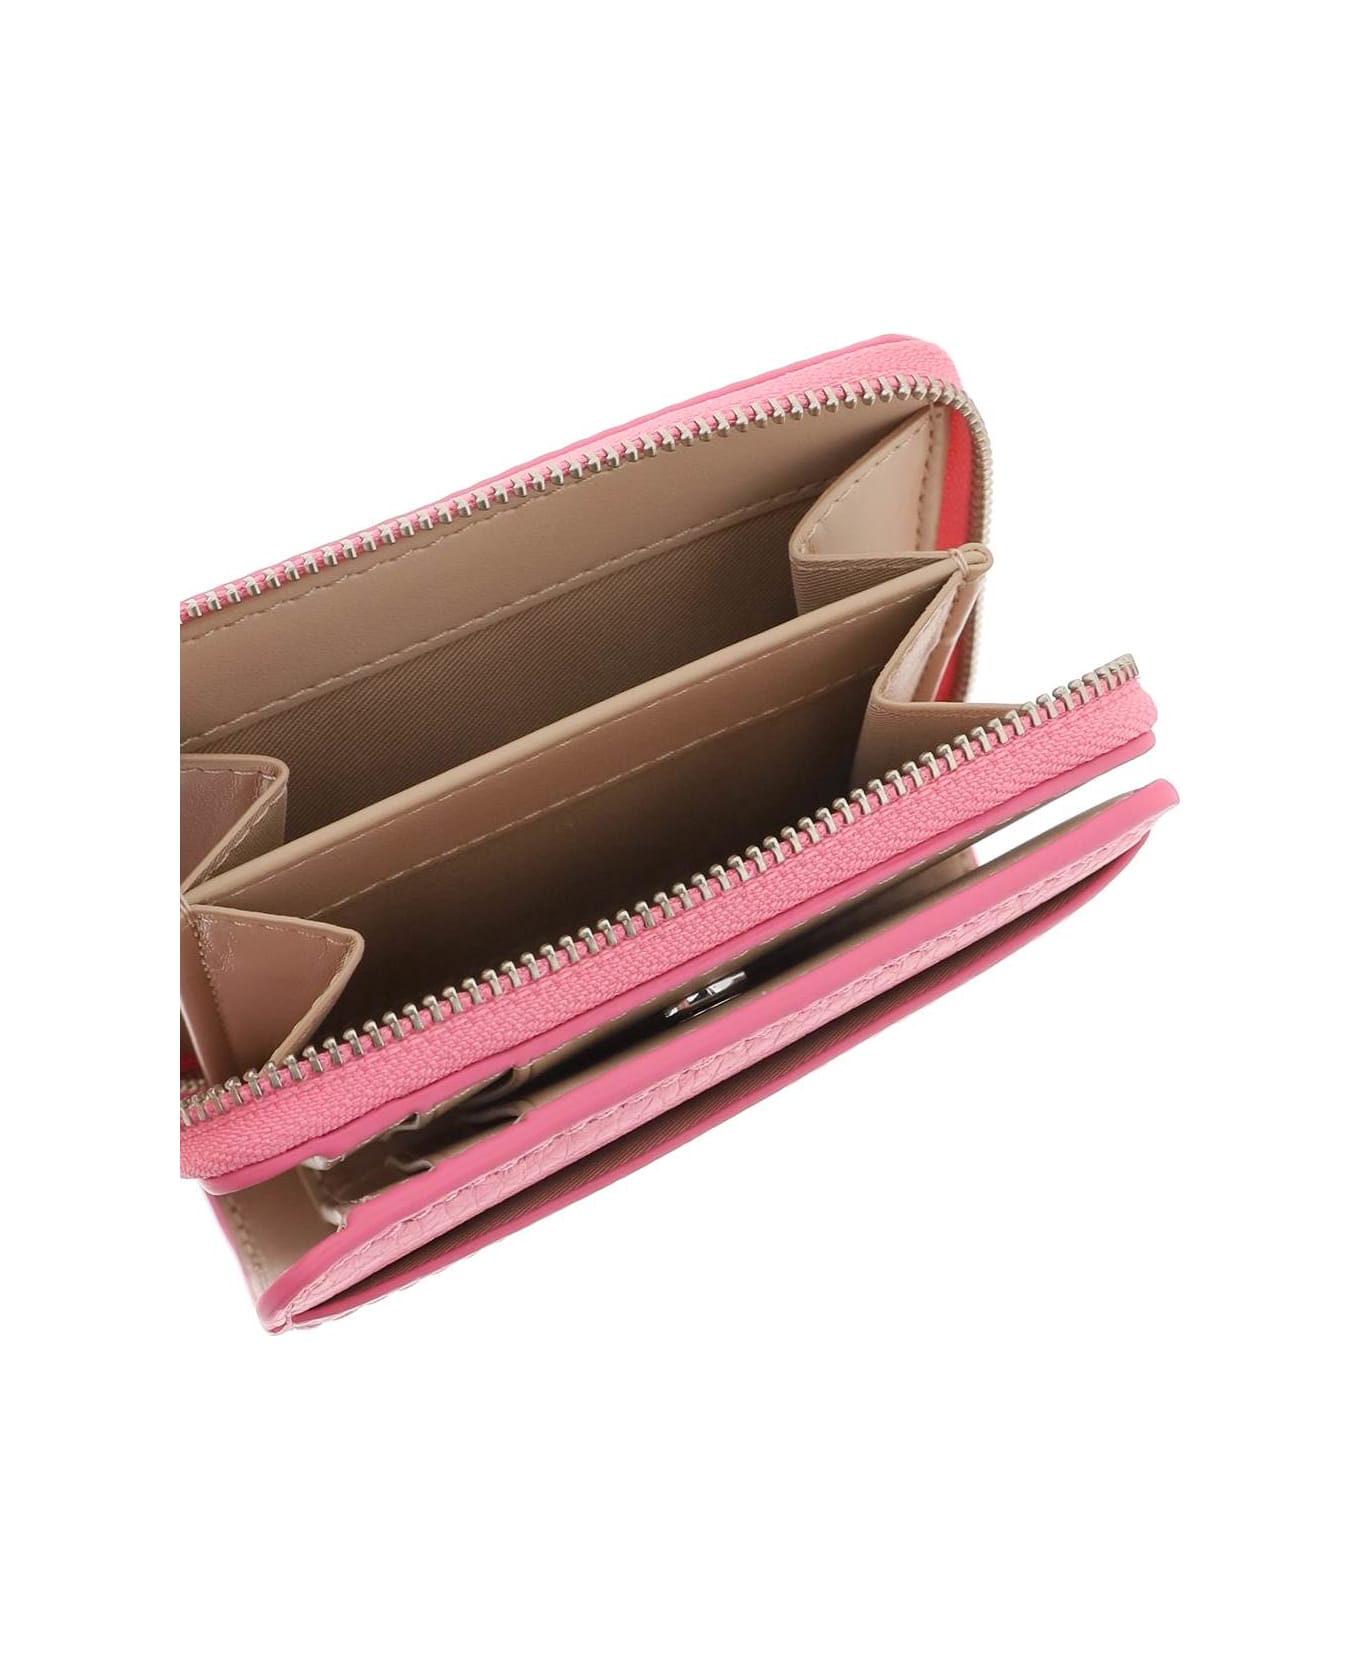 Marc Jacobs The Leather Mini Compact Wallet - PETAL PINK (Pink)